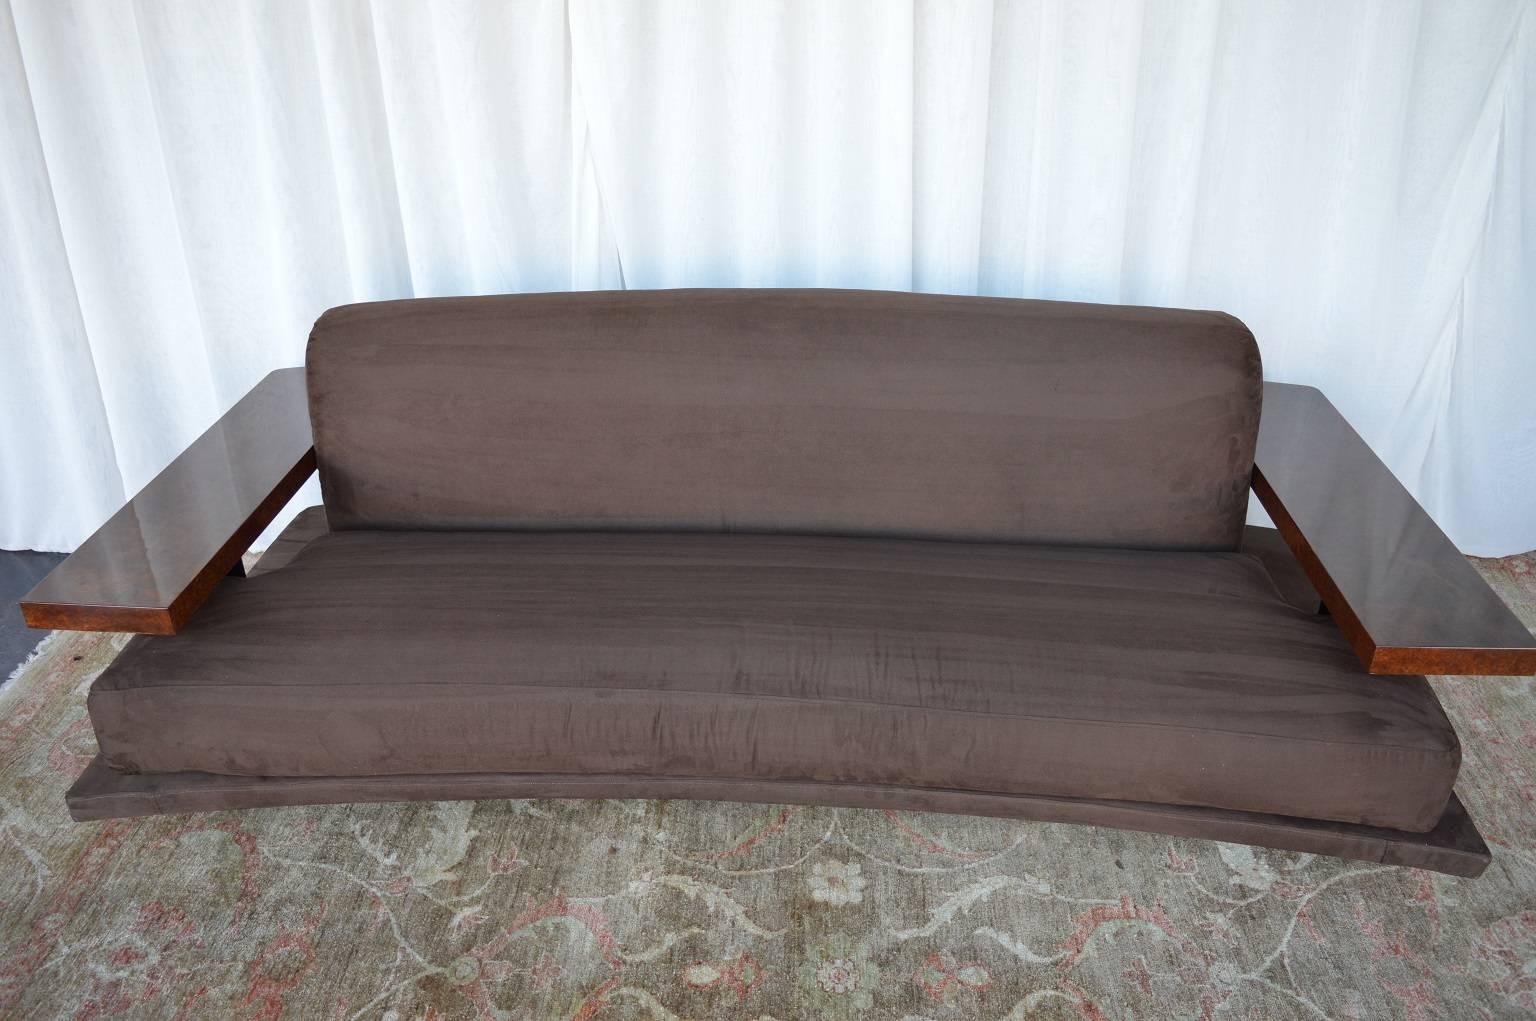 American Art Deco suede sofa. The arms of the sofa are made with bird’s eye maple and black ebony legs. Chocolate brown suede upholstery.